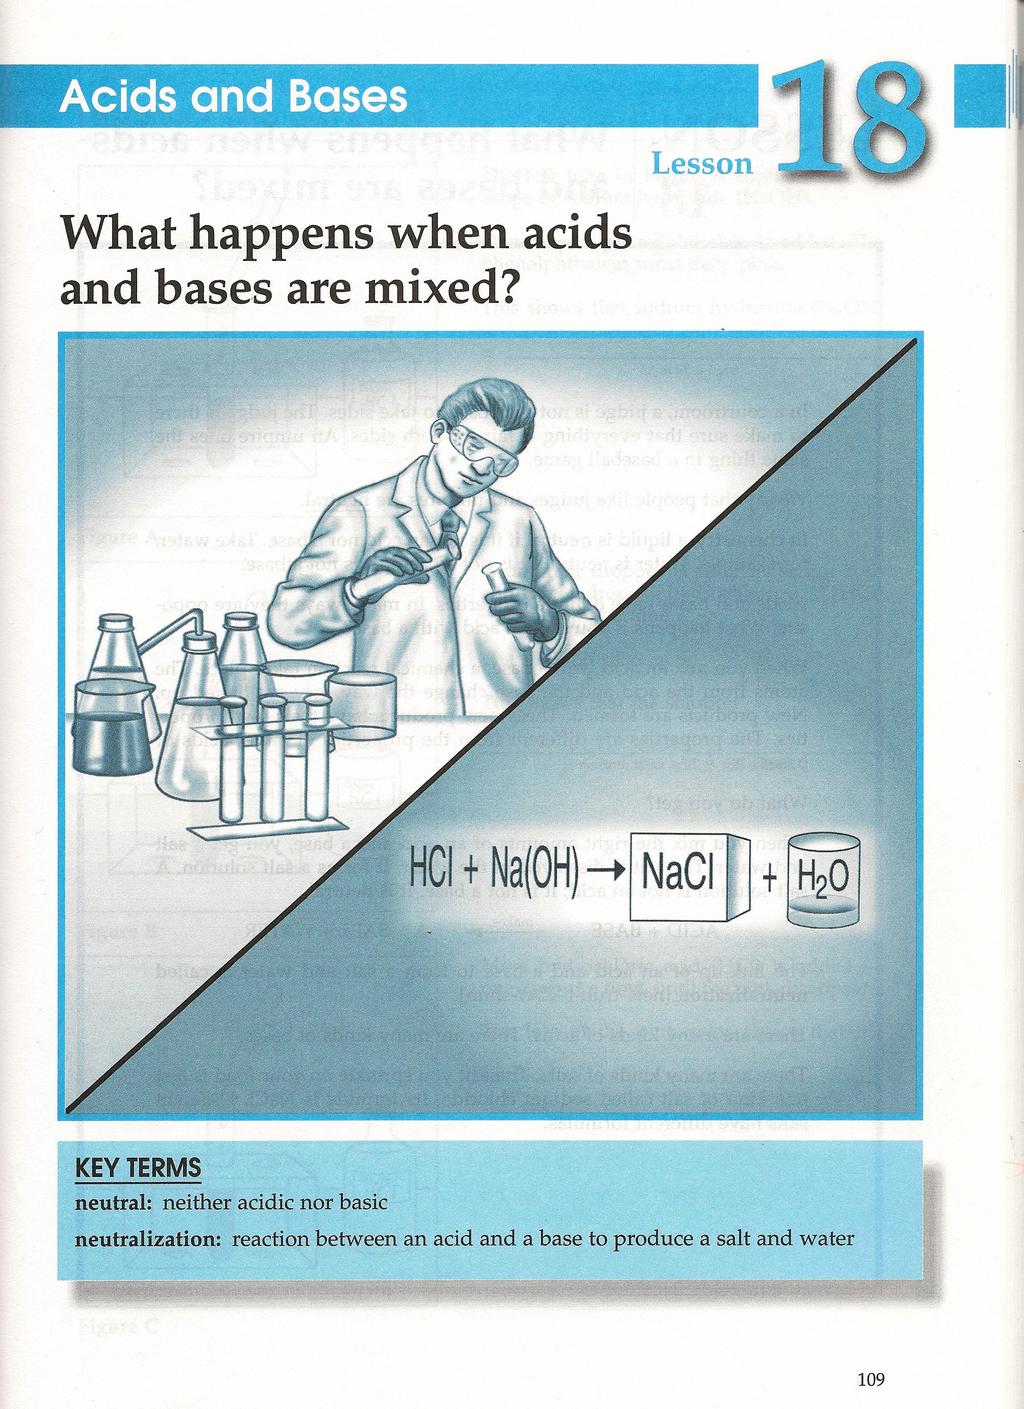 c Acids and Bases ' - II,... Lesson What happens when acids and bases are mixed?